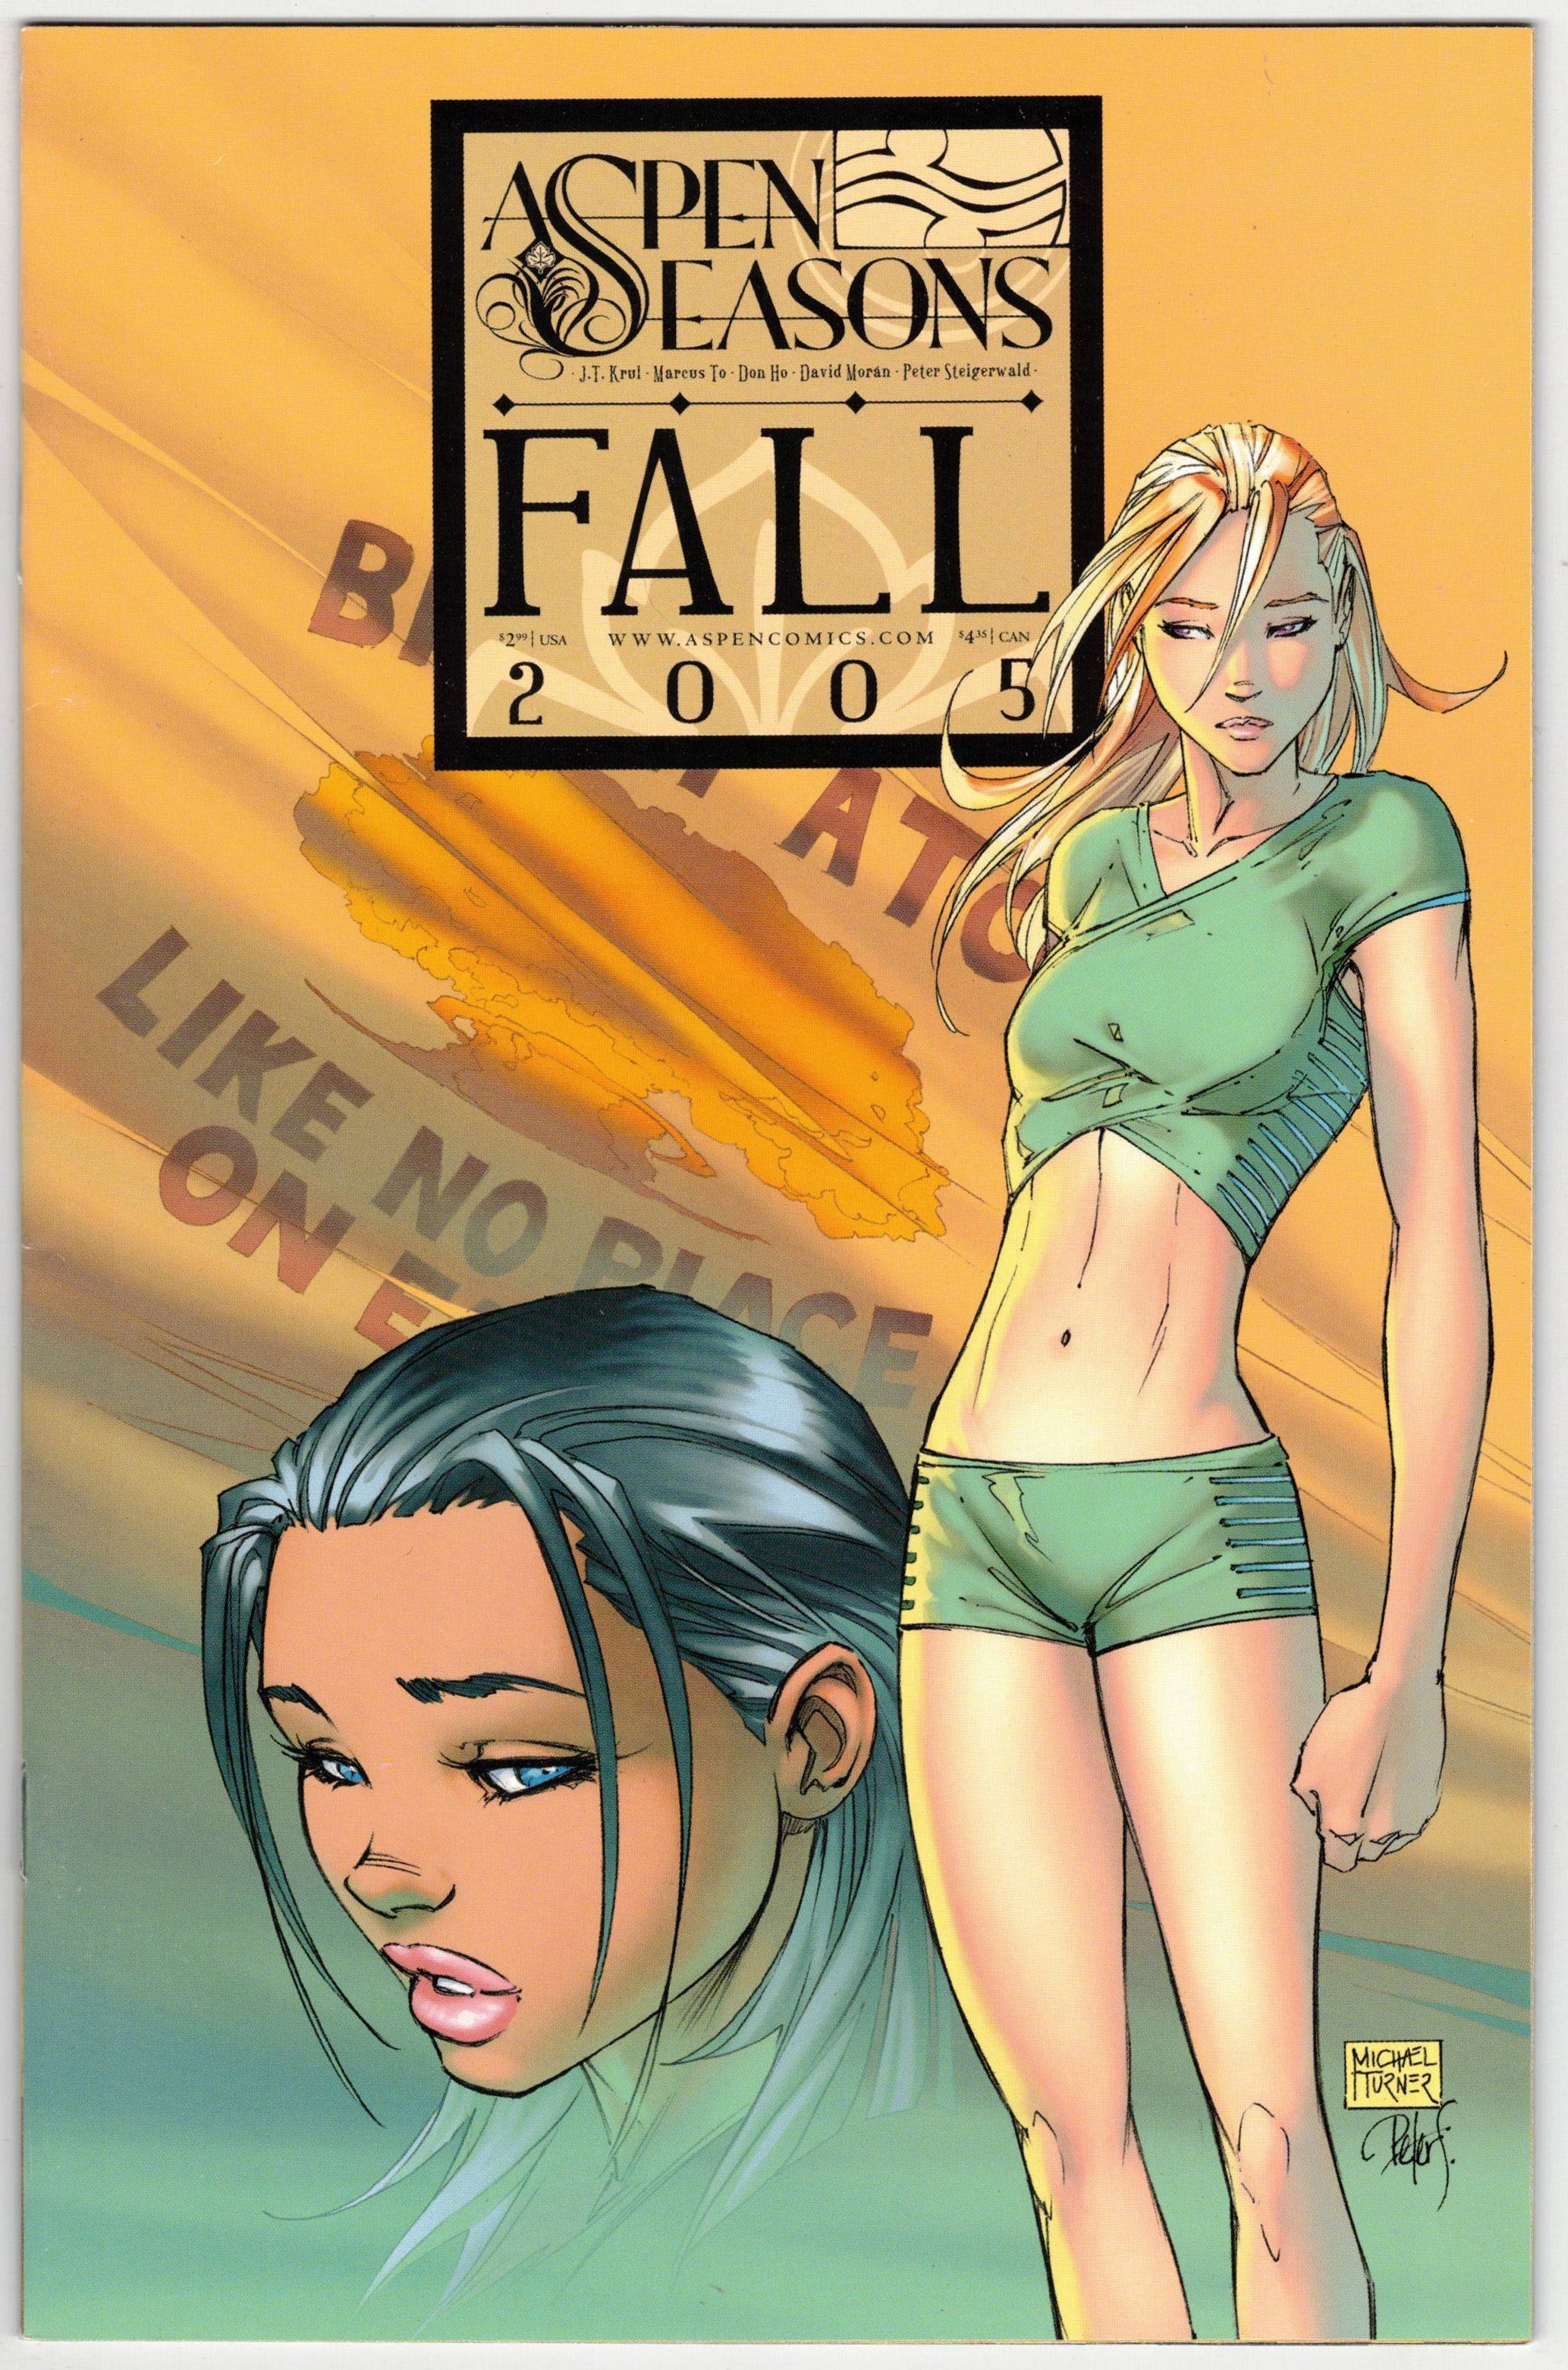 Photo of Aspen Seasons (2005) Issue 2A - Comic sold by Stronghold Collectibles